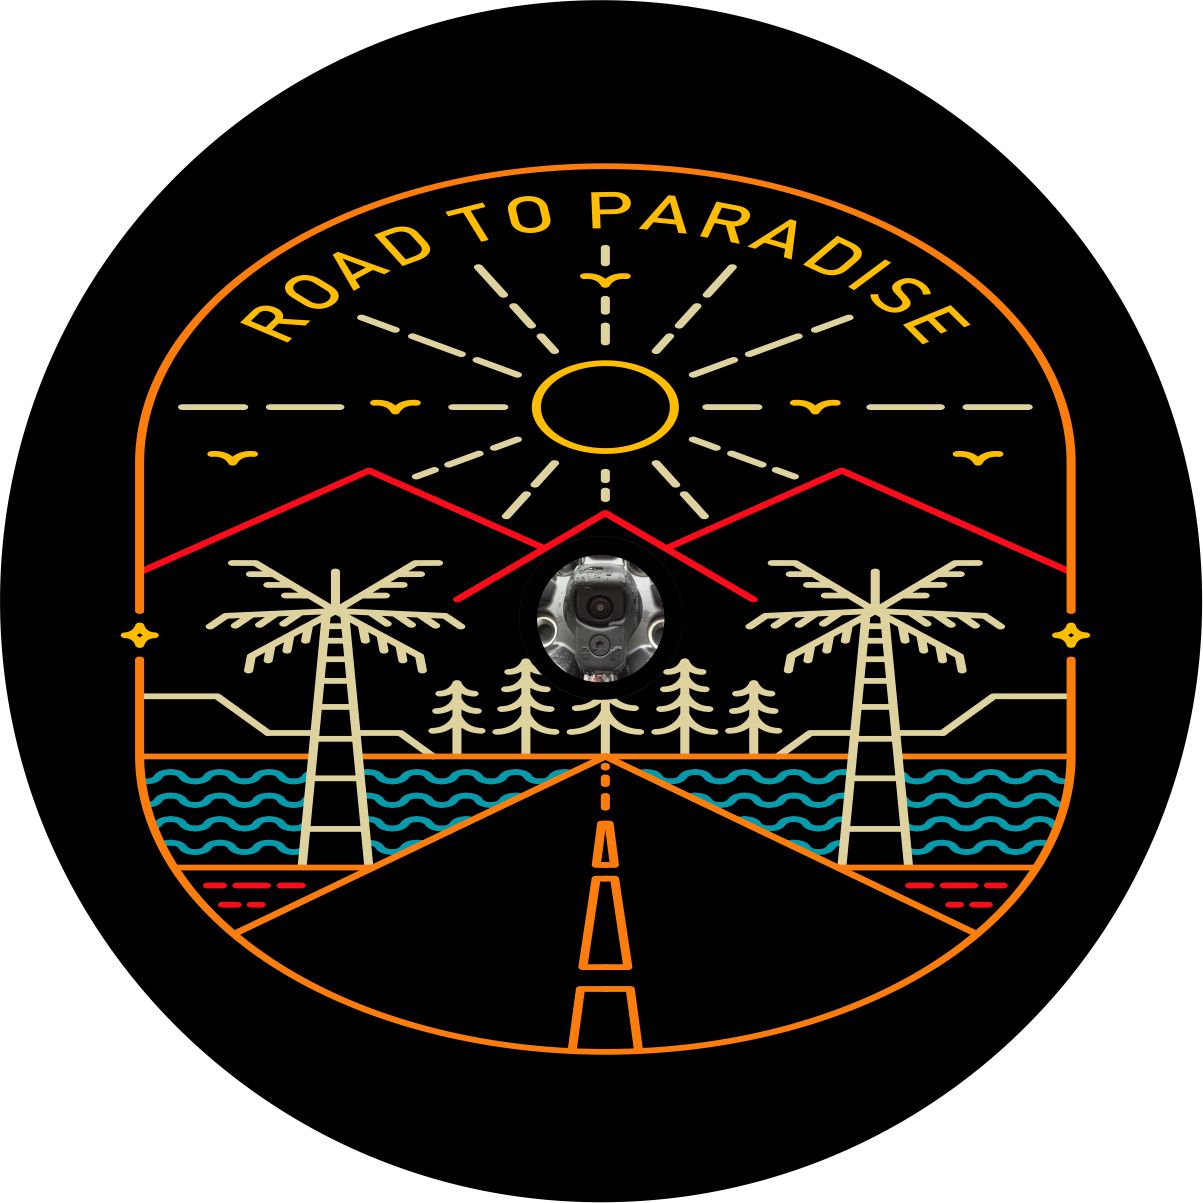 Thin lined designed gives the look of an embroidered spare tire cover design. Road to paradise tire cover with a scene of  road, trees, mountains, and the sun. with a back up camera hole for back up cameras